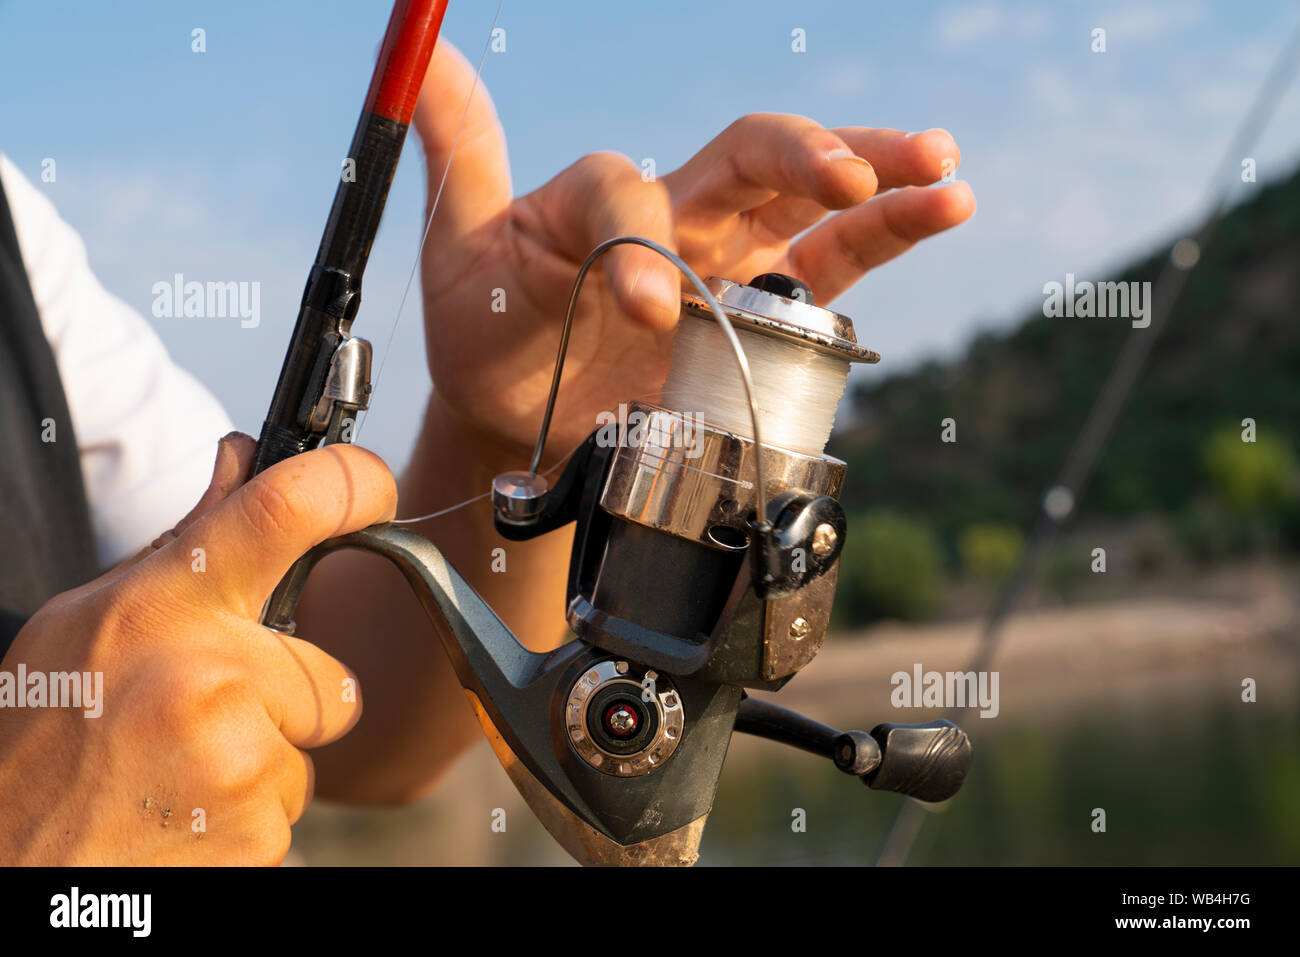 Male hand holding fishing rod and getting ready to hook Stock